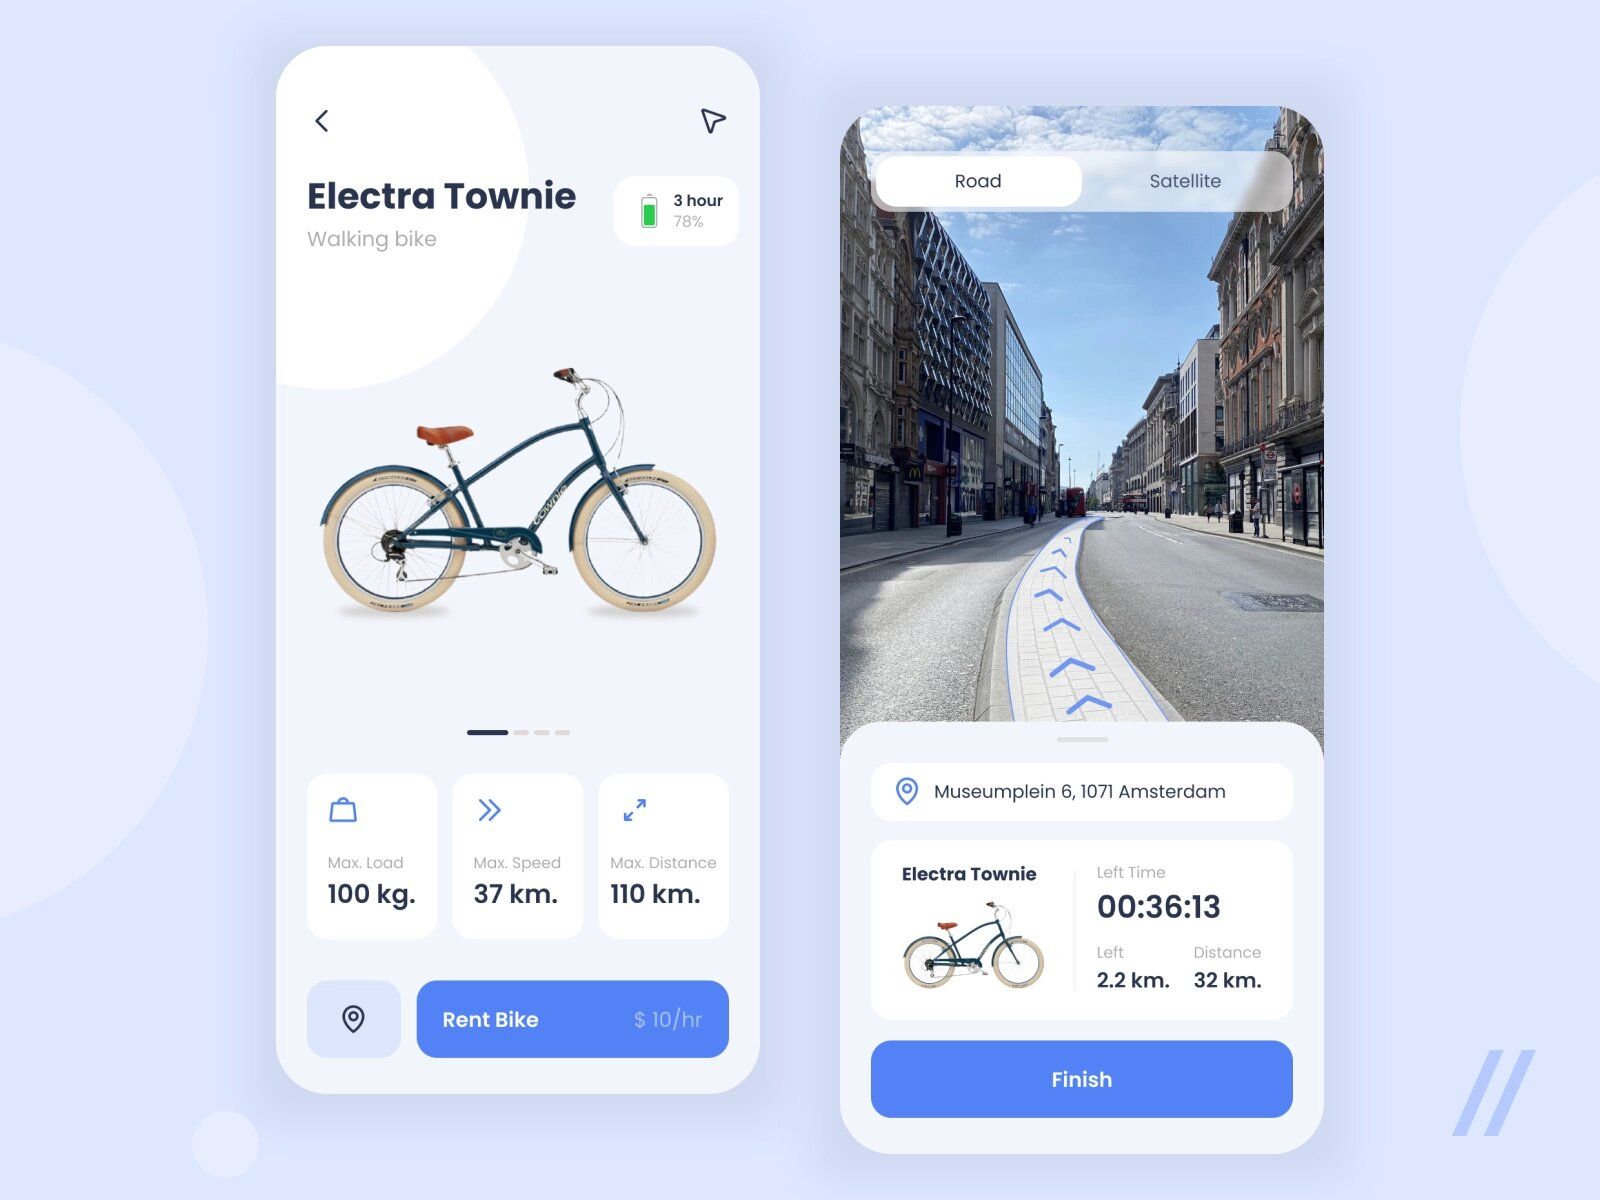 Custom small business app has a higher cost but offers your users a much better experience (*image by [Alexandr V](https://dribbble.com/alexpurrweb){ rel="nofollow" target="_blank" .default-md}*)